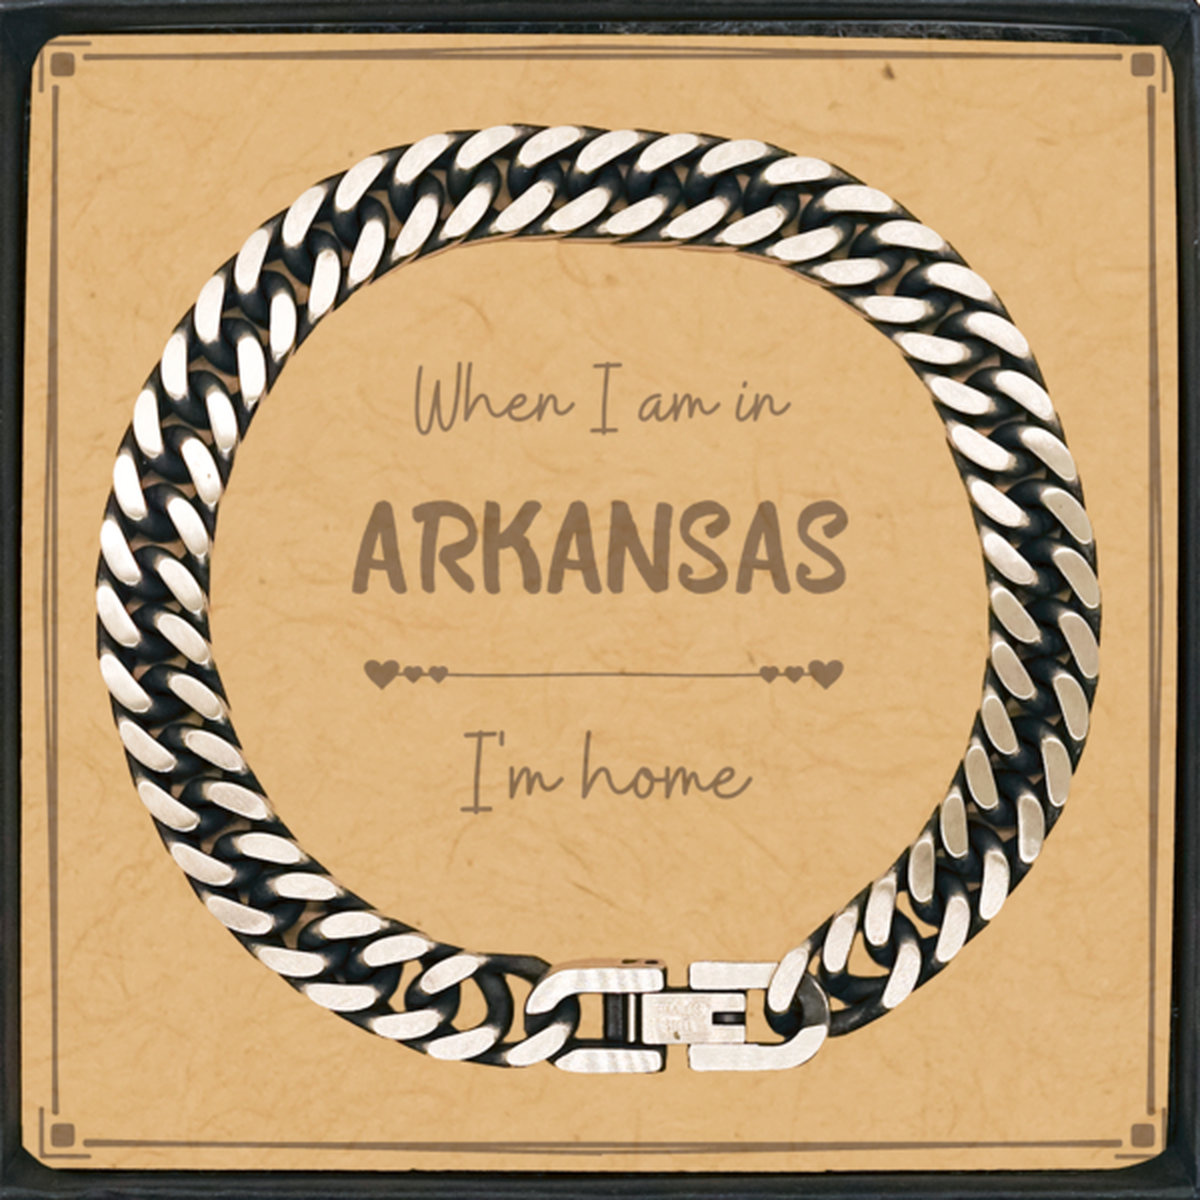 When I am in Arkansas I'm home Cuban Link Chain Bracelet, Message Card Gifts For Arkansas, State Arkansas Birthday Gifts for Friends Coworker